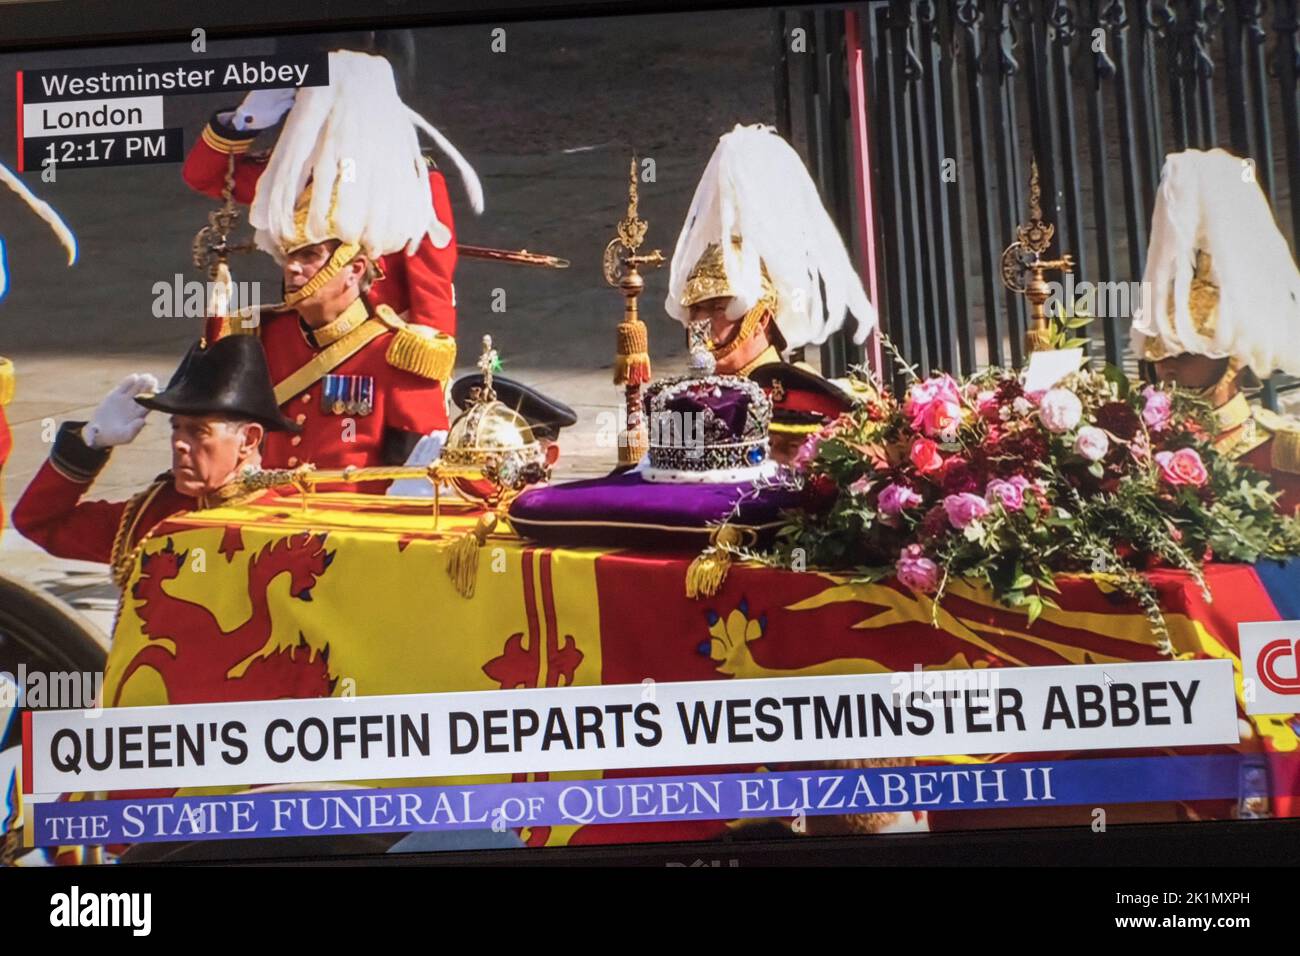 The CNN News website at the end of the funeral of Queen Elizabeth II in London on 19th September 2022. Stock Photo